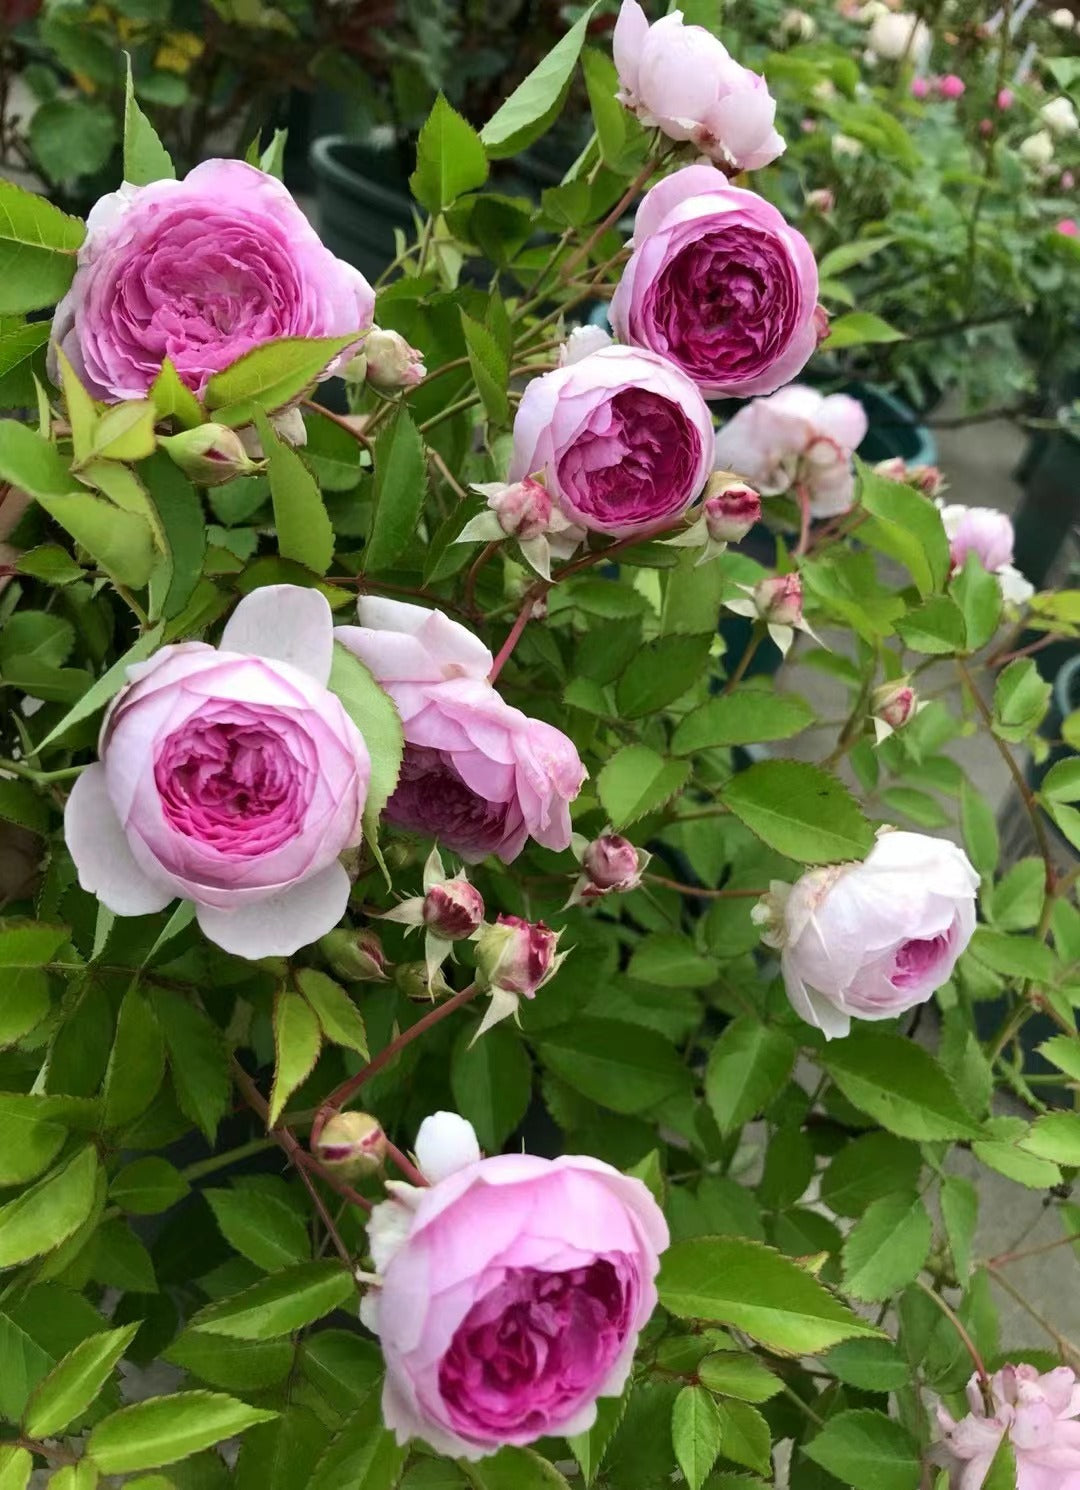 Rose[Aunt Margy's] -2 Gal OwnRoot| Thumbelina|Strong Adaptability| Rapid Growth| Strong Disease Resistance|Long flowering period|拇指姑娘,麻吉婶婶